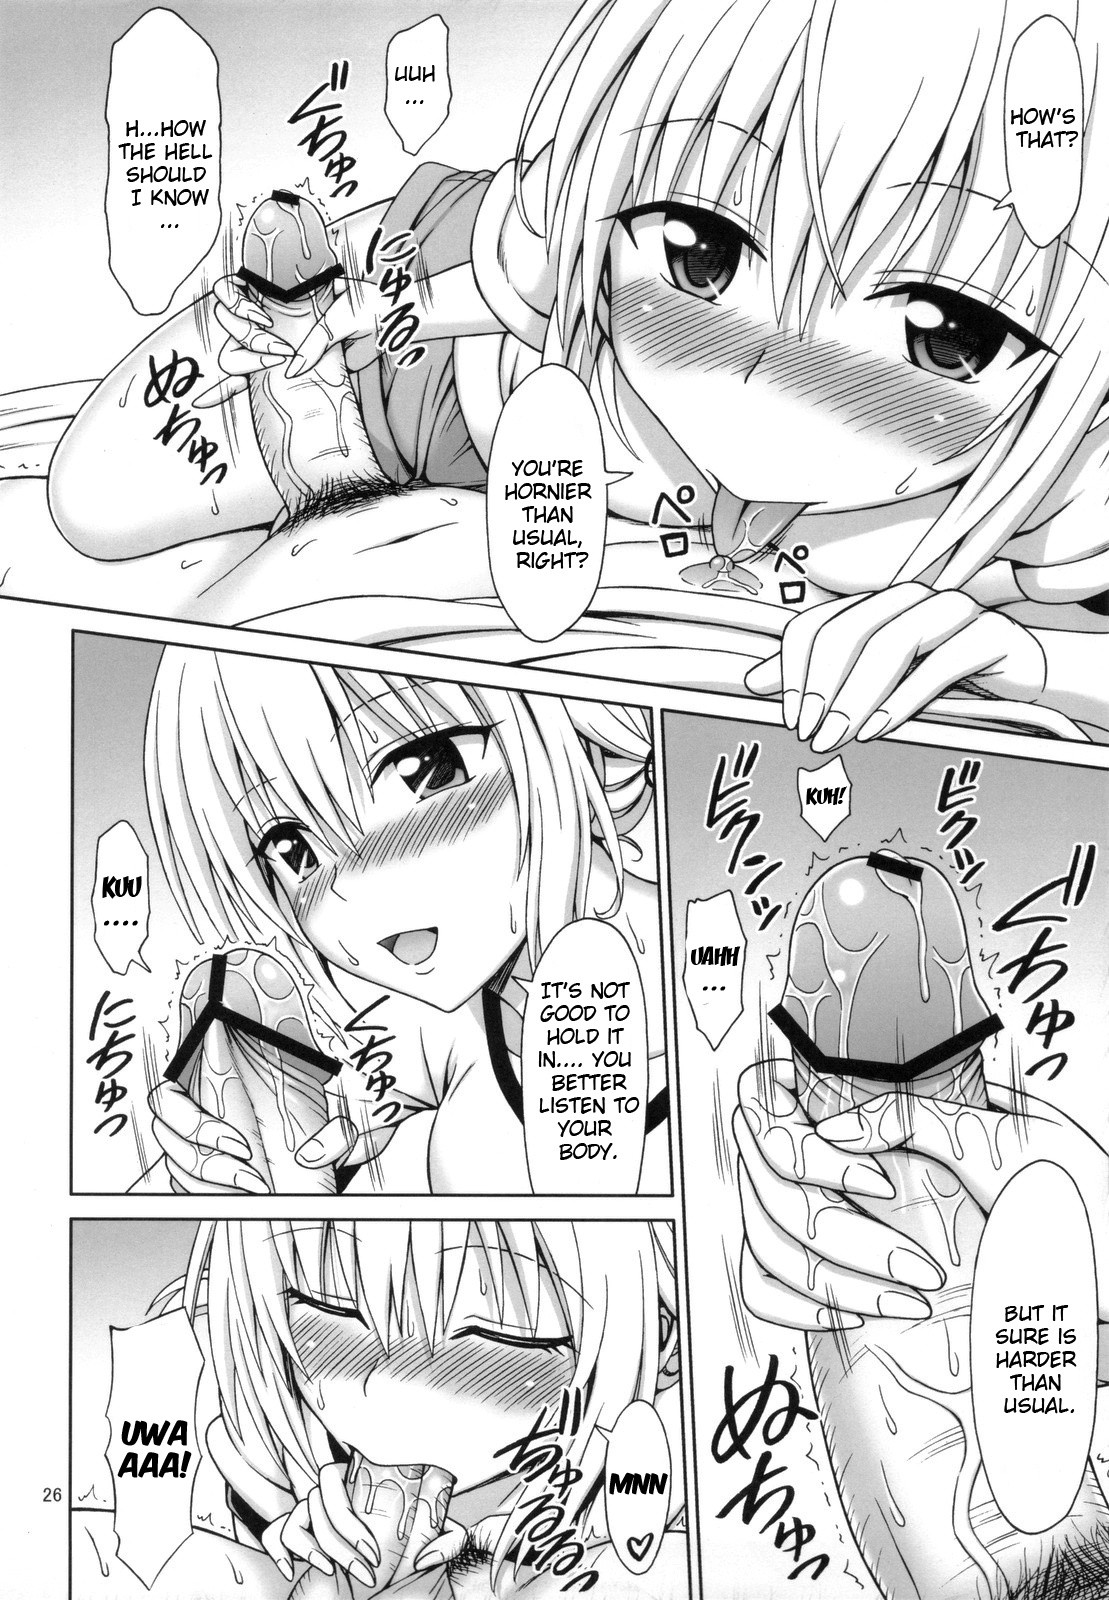 After-School Trouble hentai manga picture 25